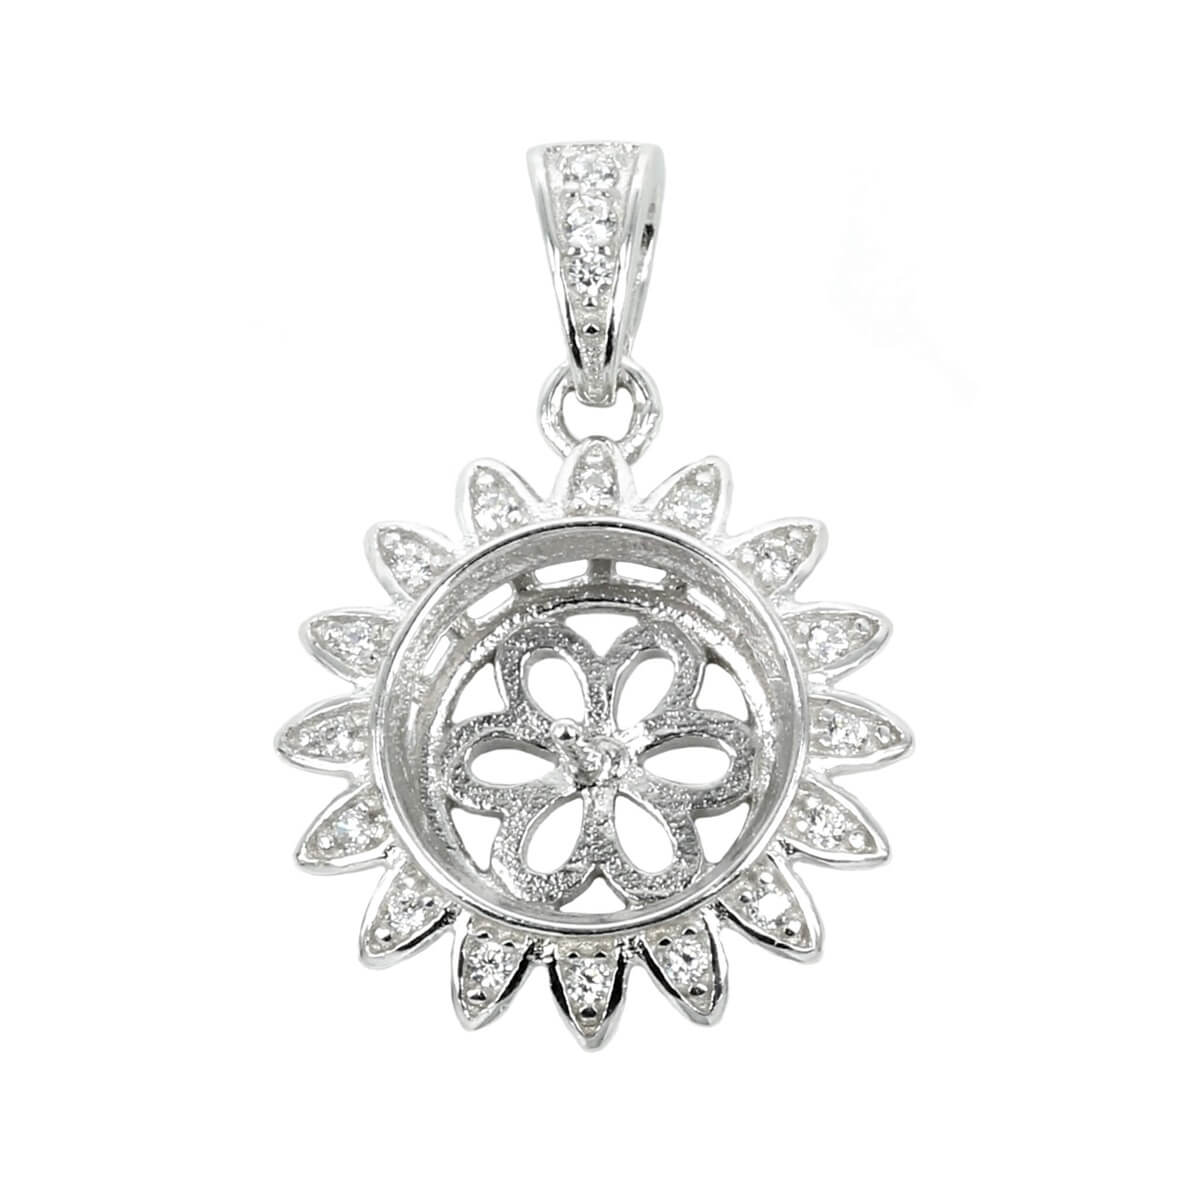 Round Cubic Zirconia Embellished Sunflower Pearl Pendant with Soldered Loop and Bail in Sterling Silver 10mm 